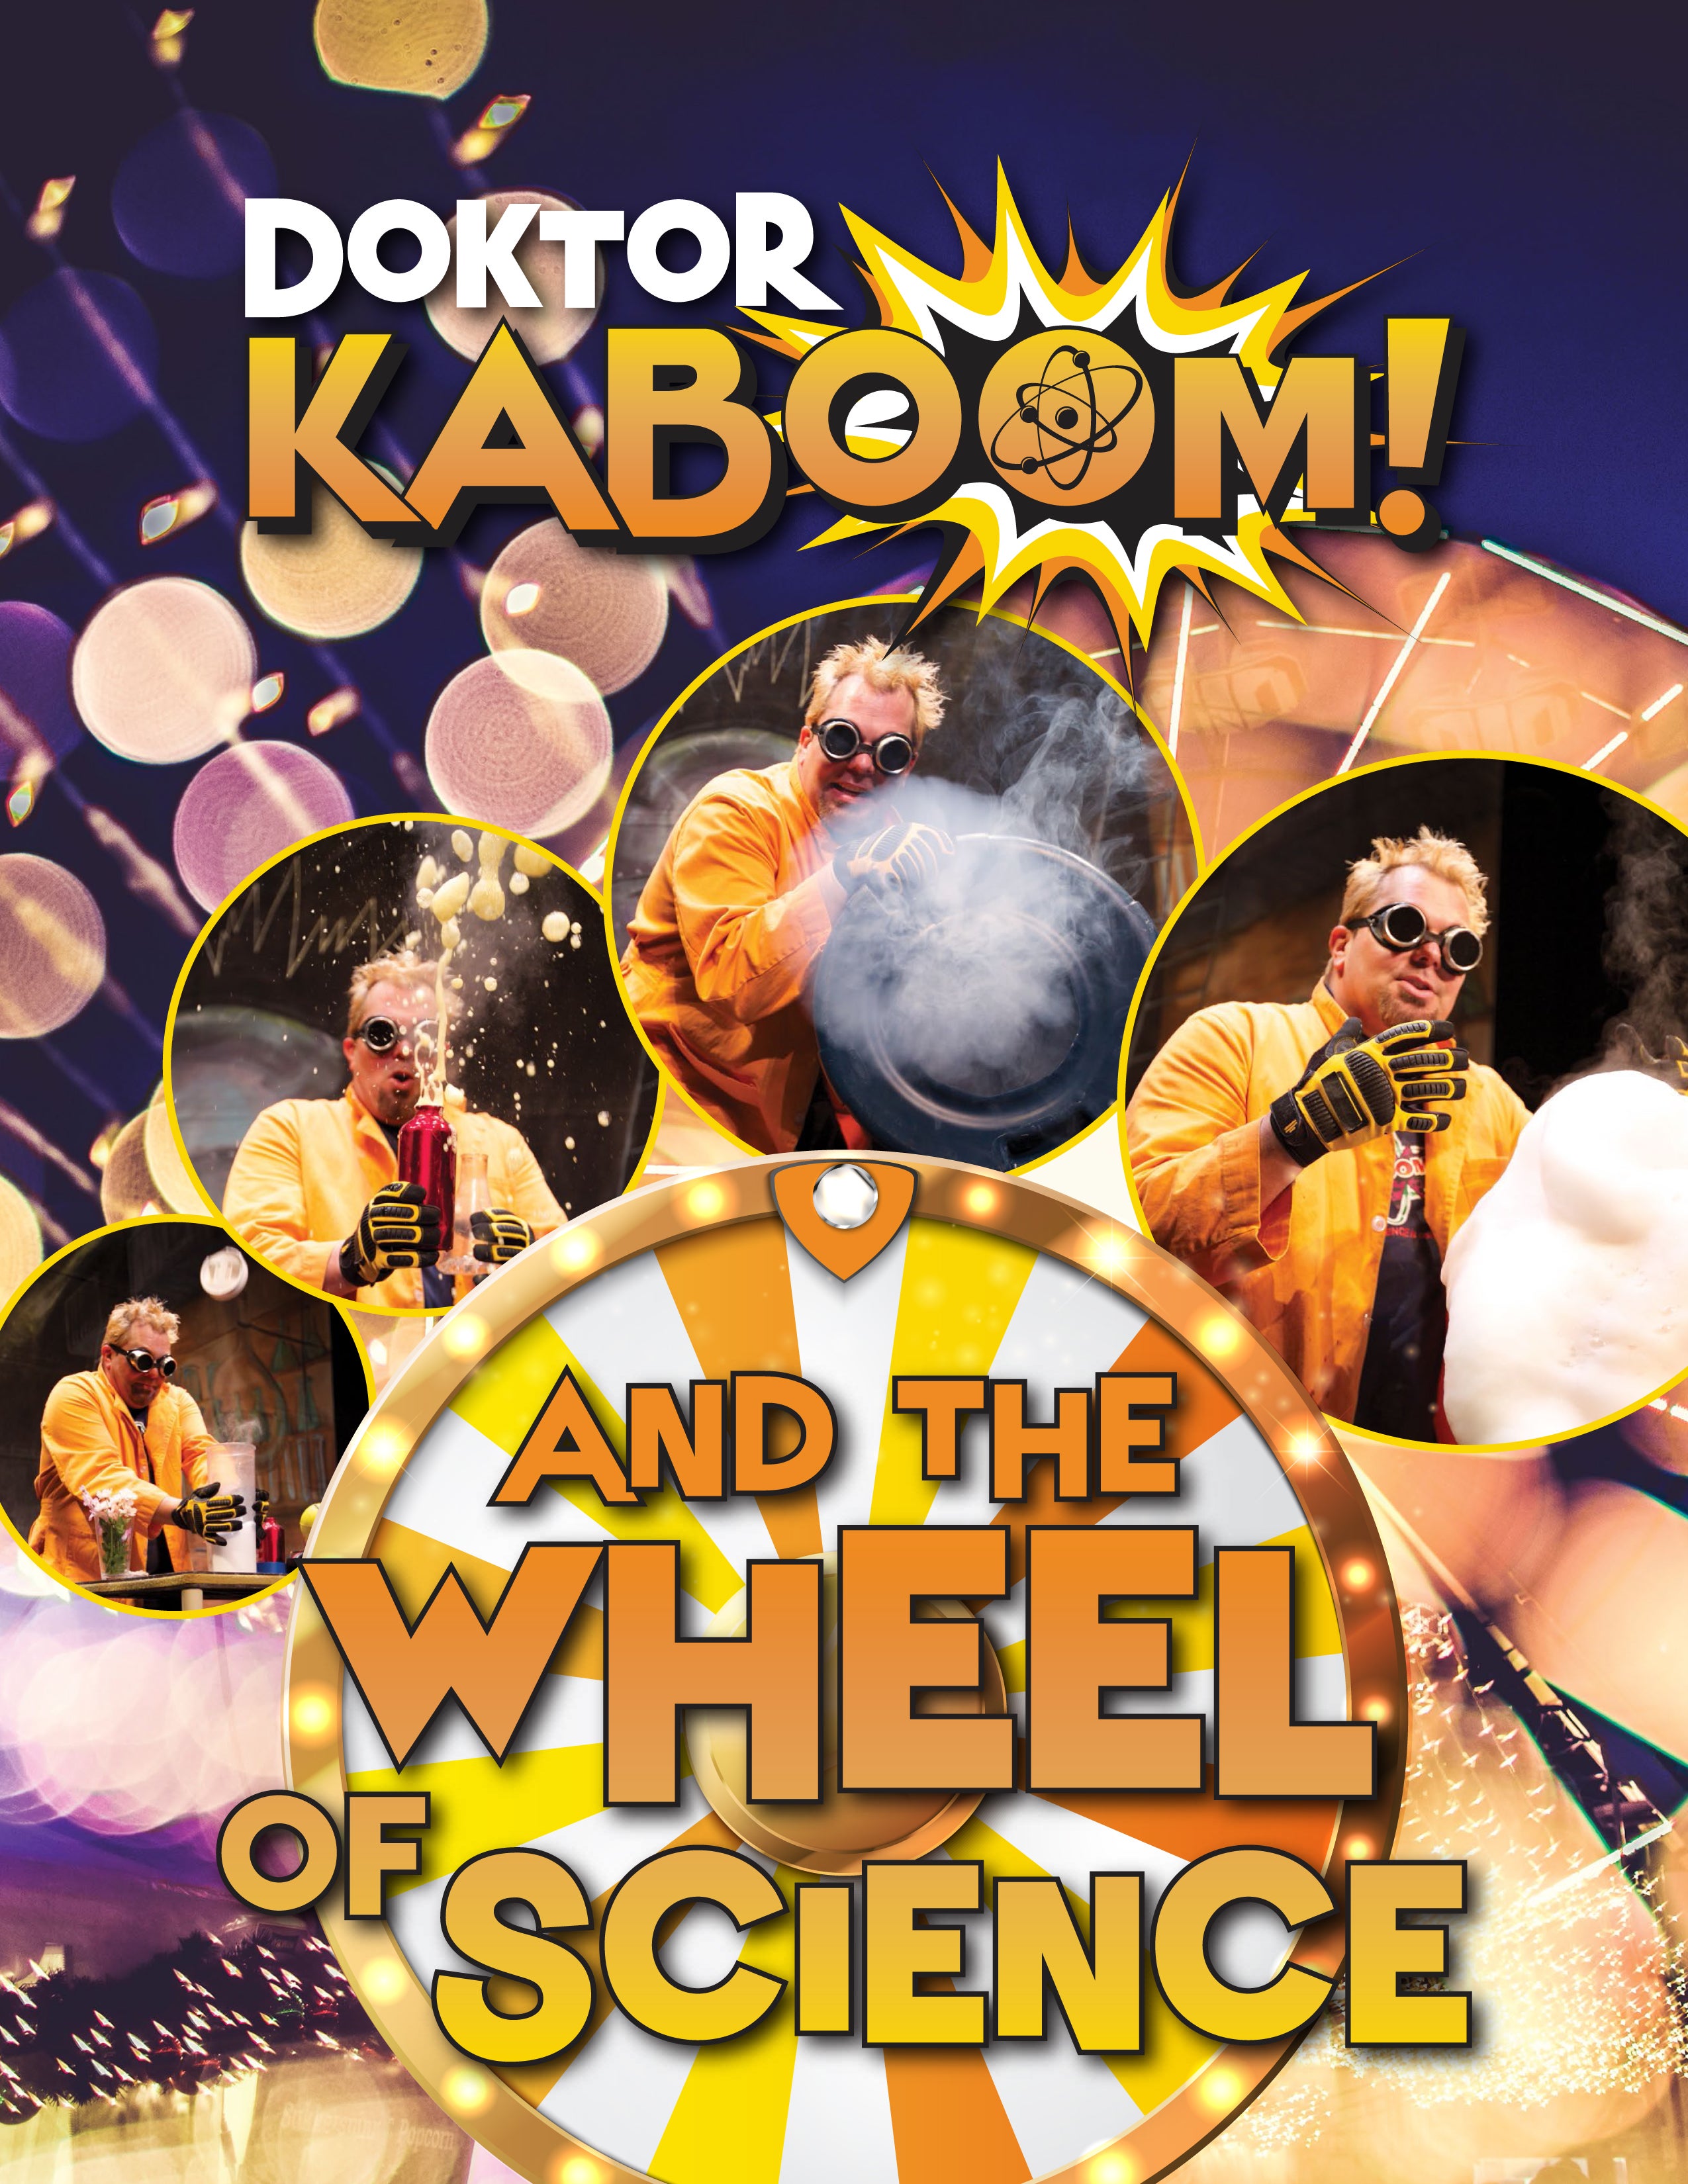 Doktor Kaboom! And The Wheel of Science Poster.jpg